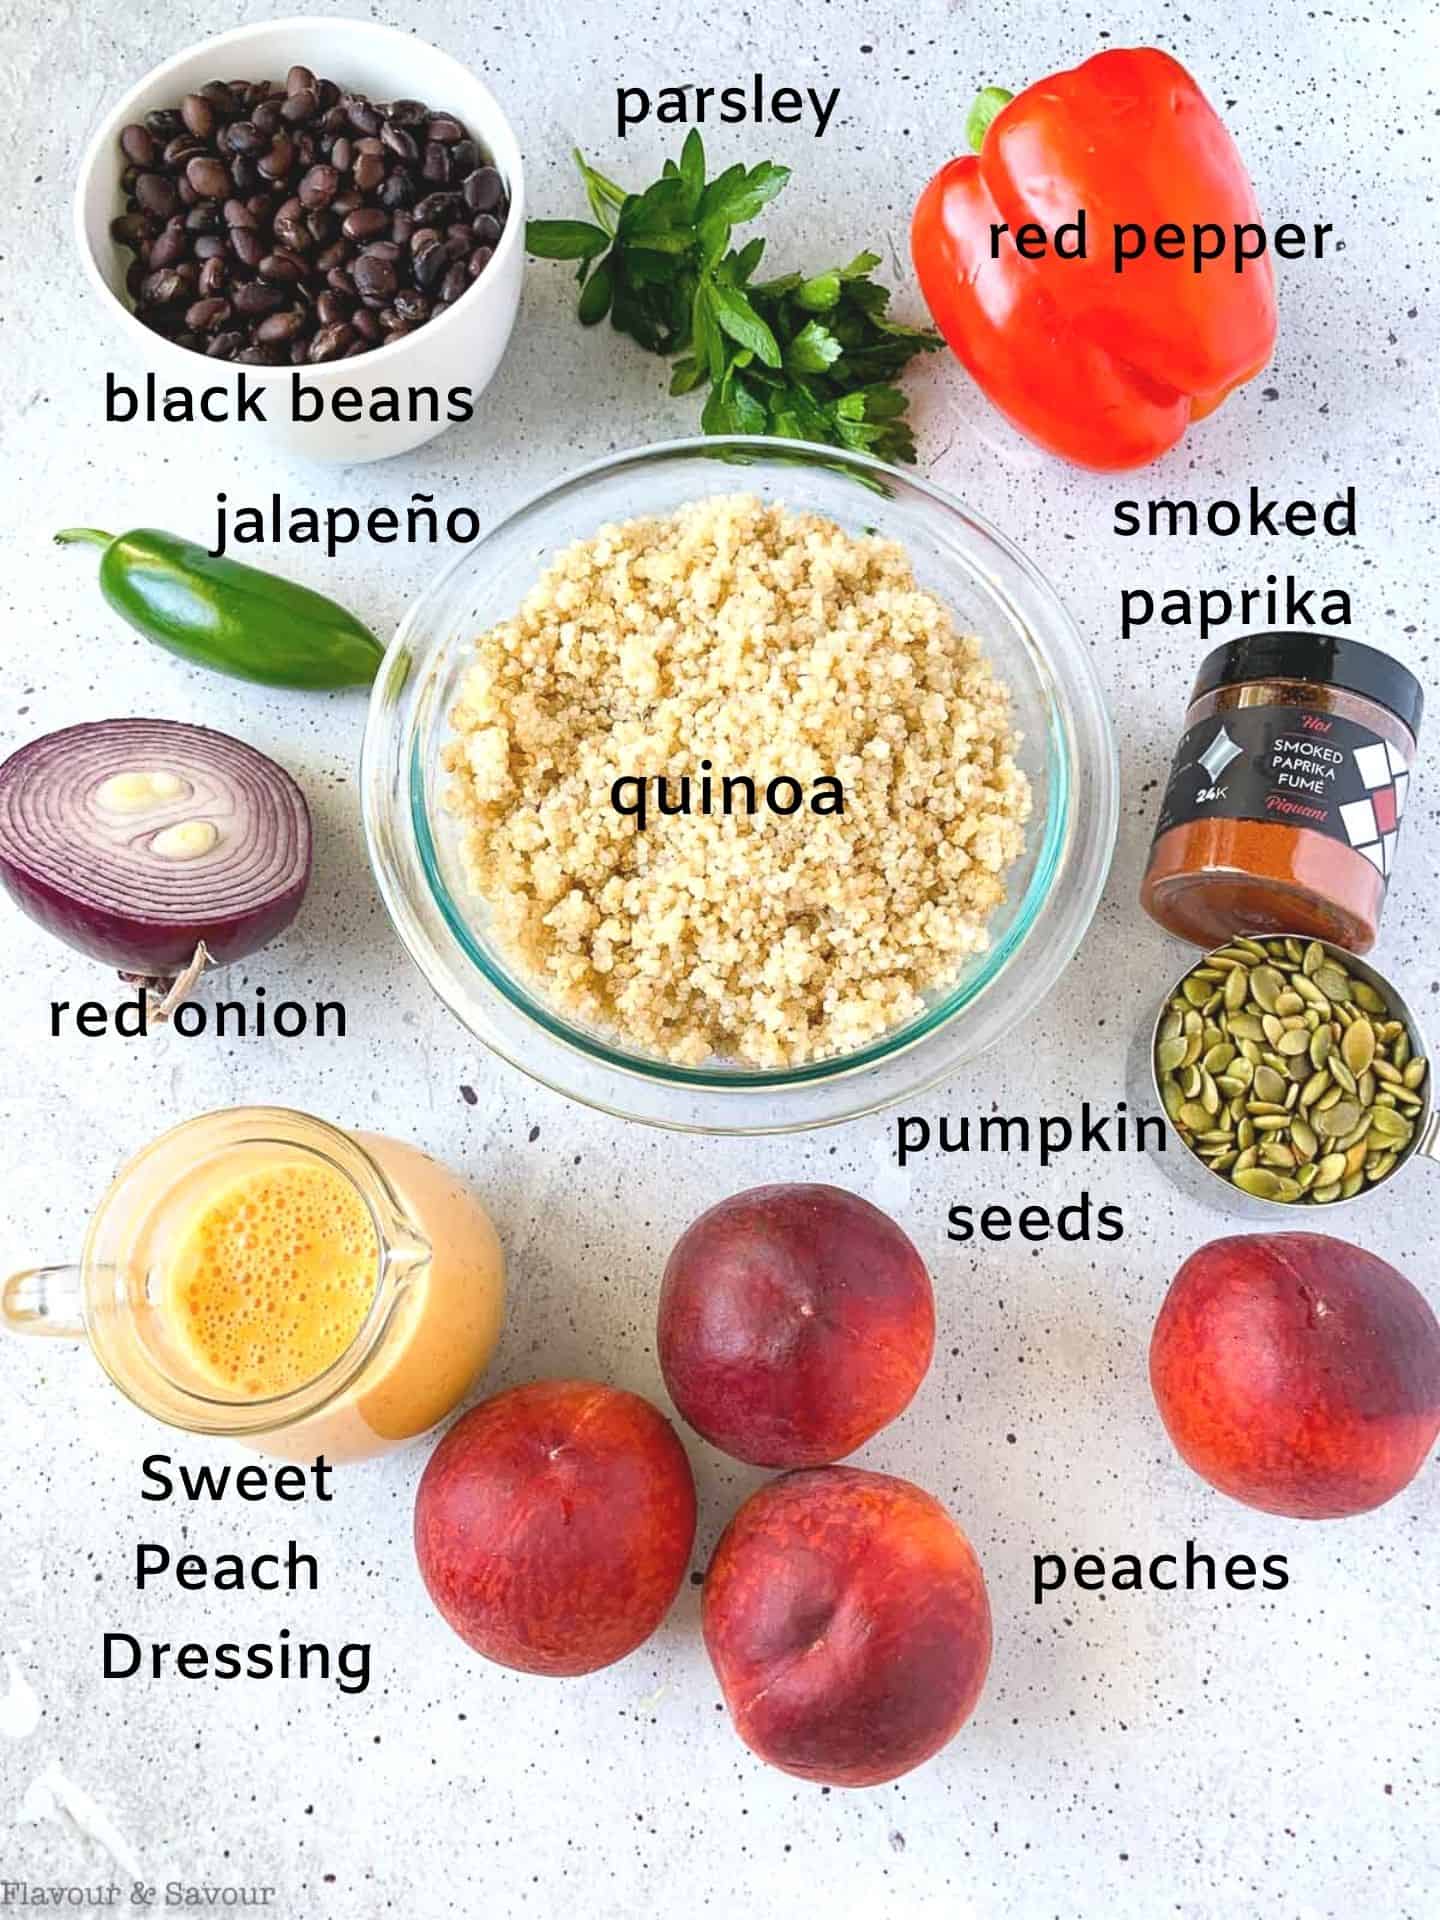 Ingredients for Quinoa Black Bean Salad with Peaches